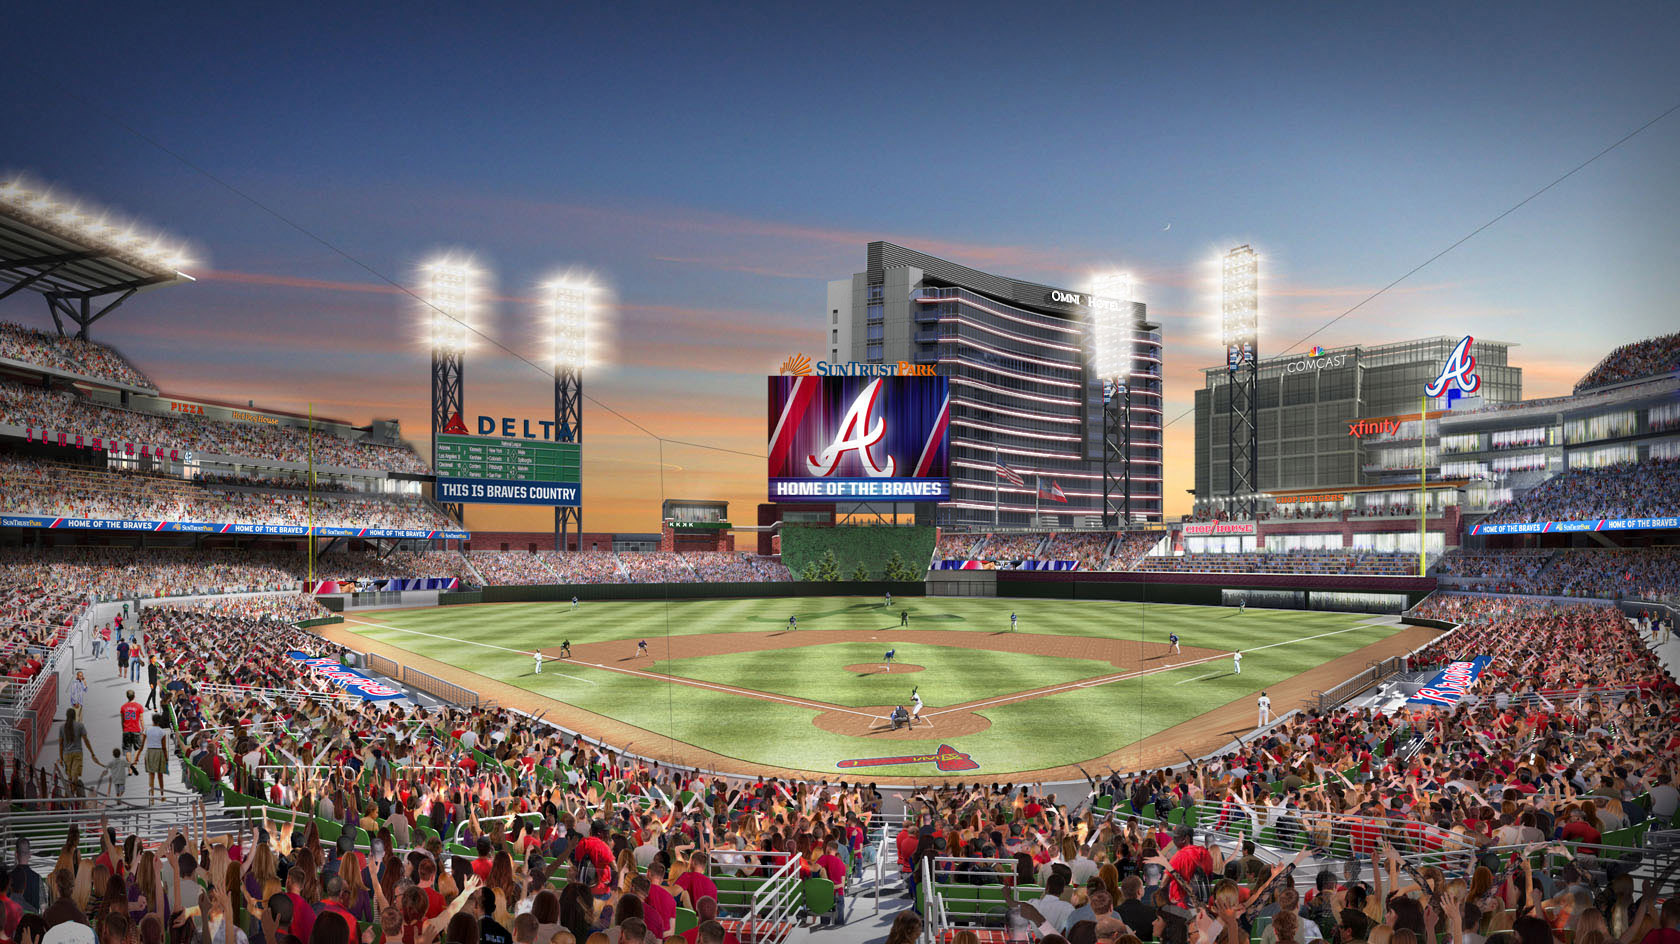 Free download COBB COUNTY Sun Trust Park Page 3 SkyscraperCity ...